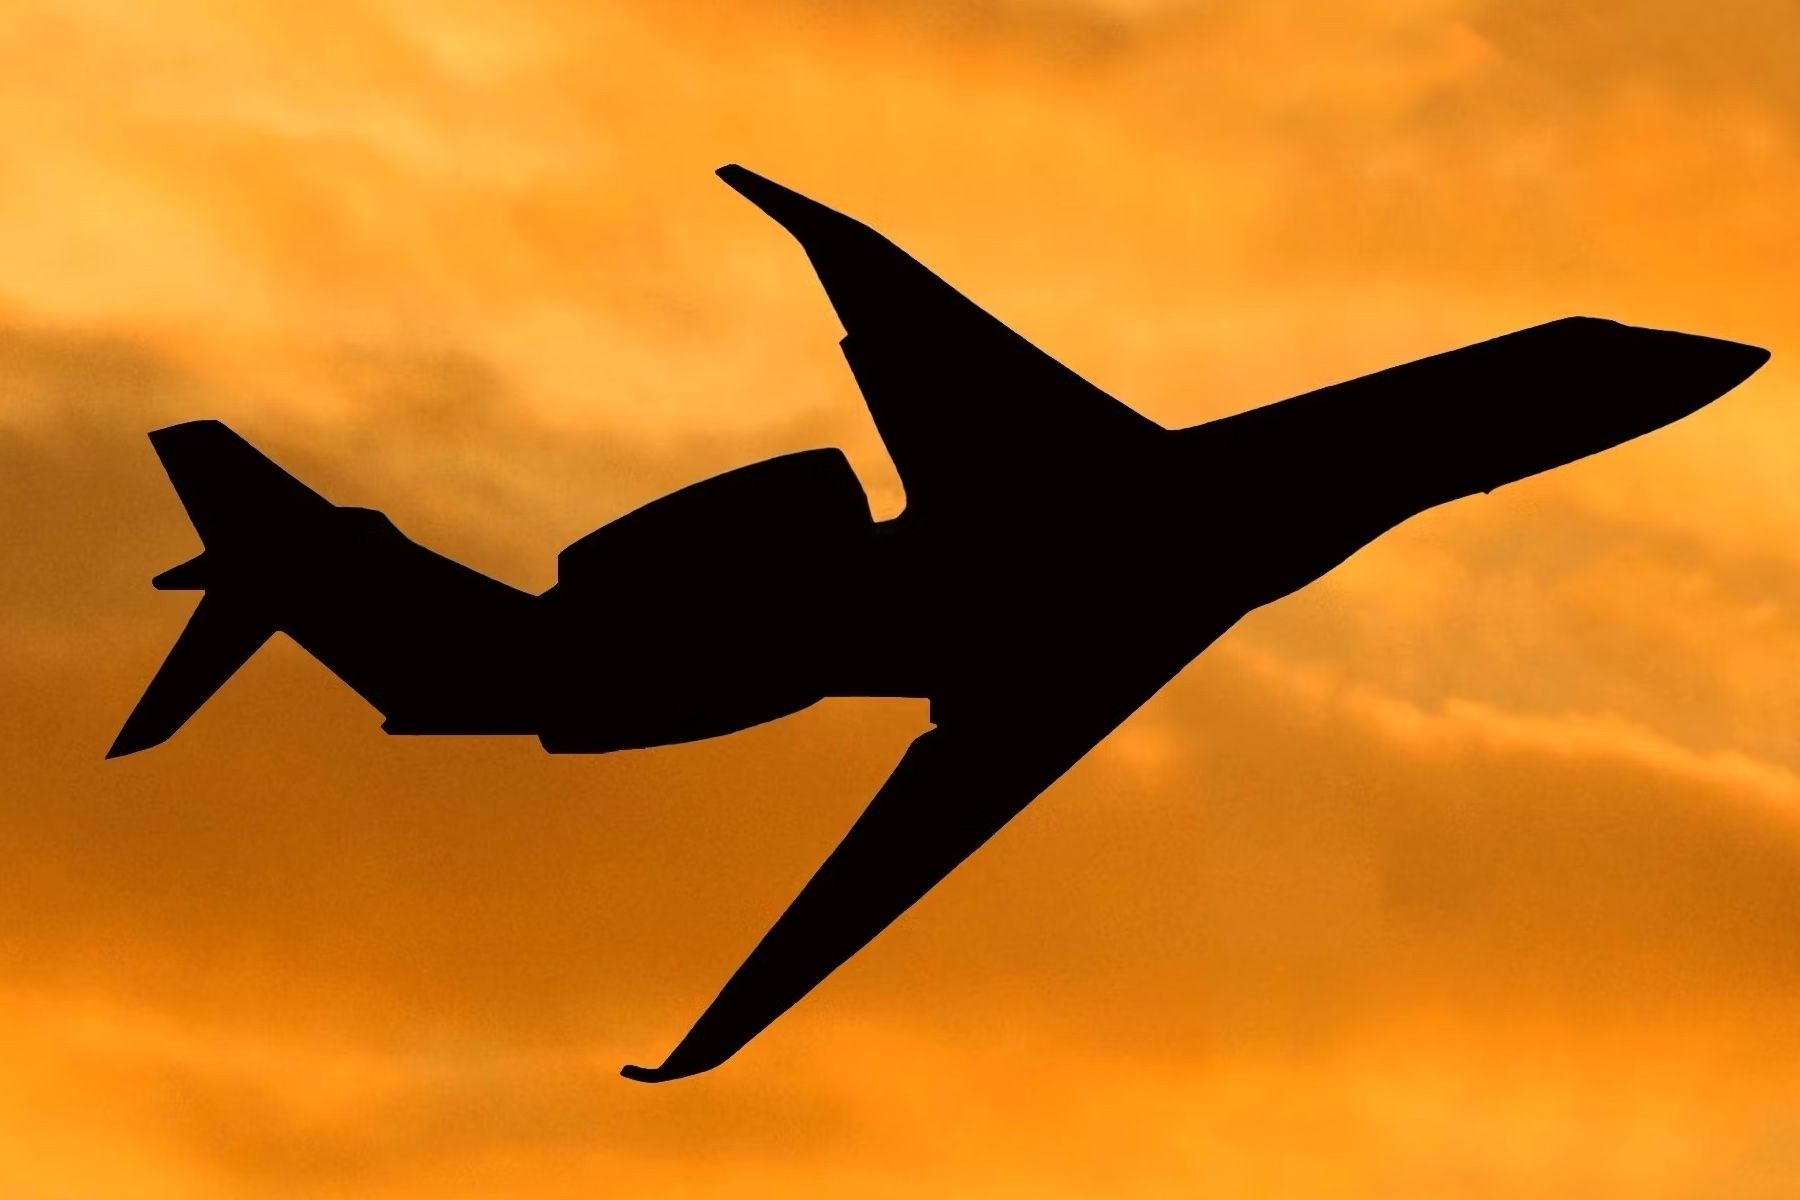 The silhouette of a private jet flying in the sky.